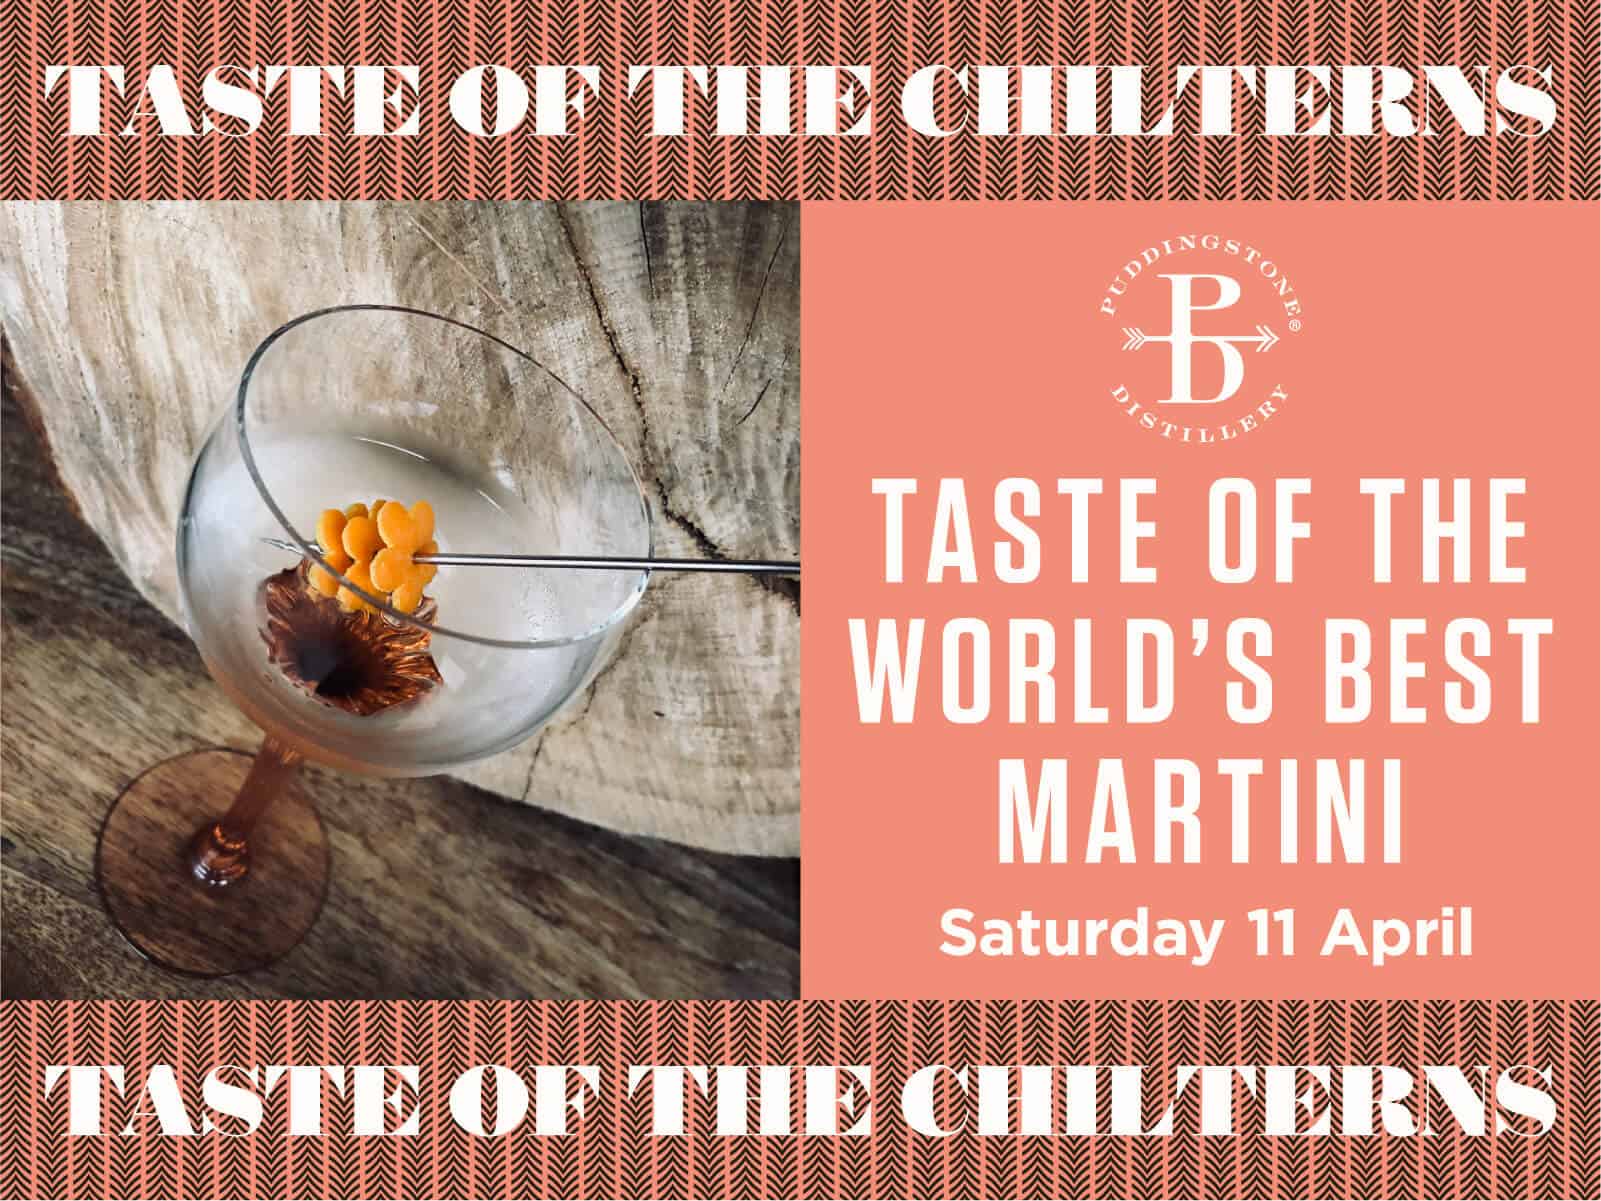 Taste of the Chilterns. Taste of the World's Best Martini at Puddingstone Distillery